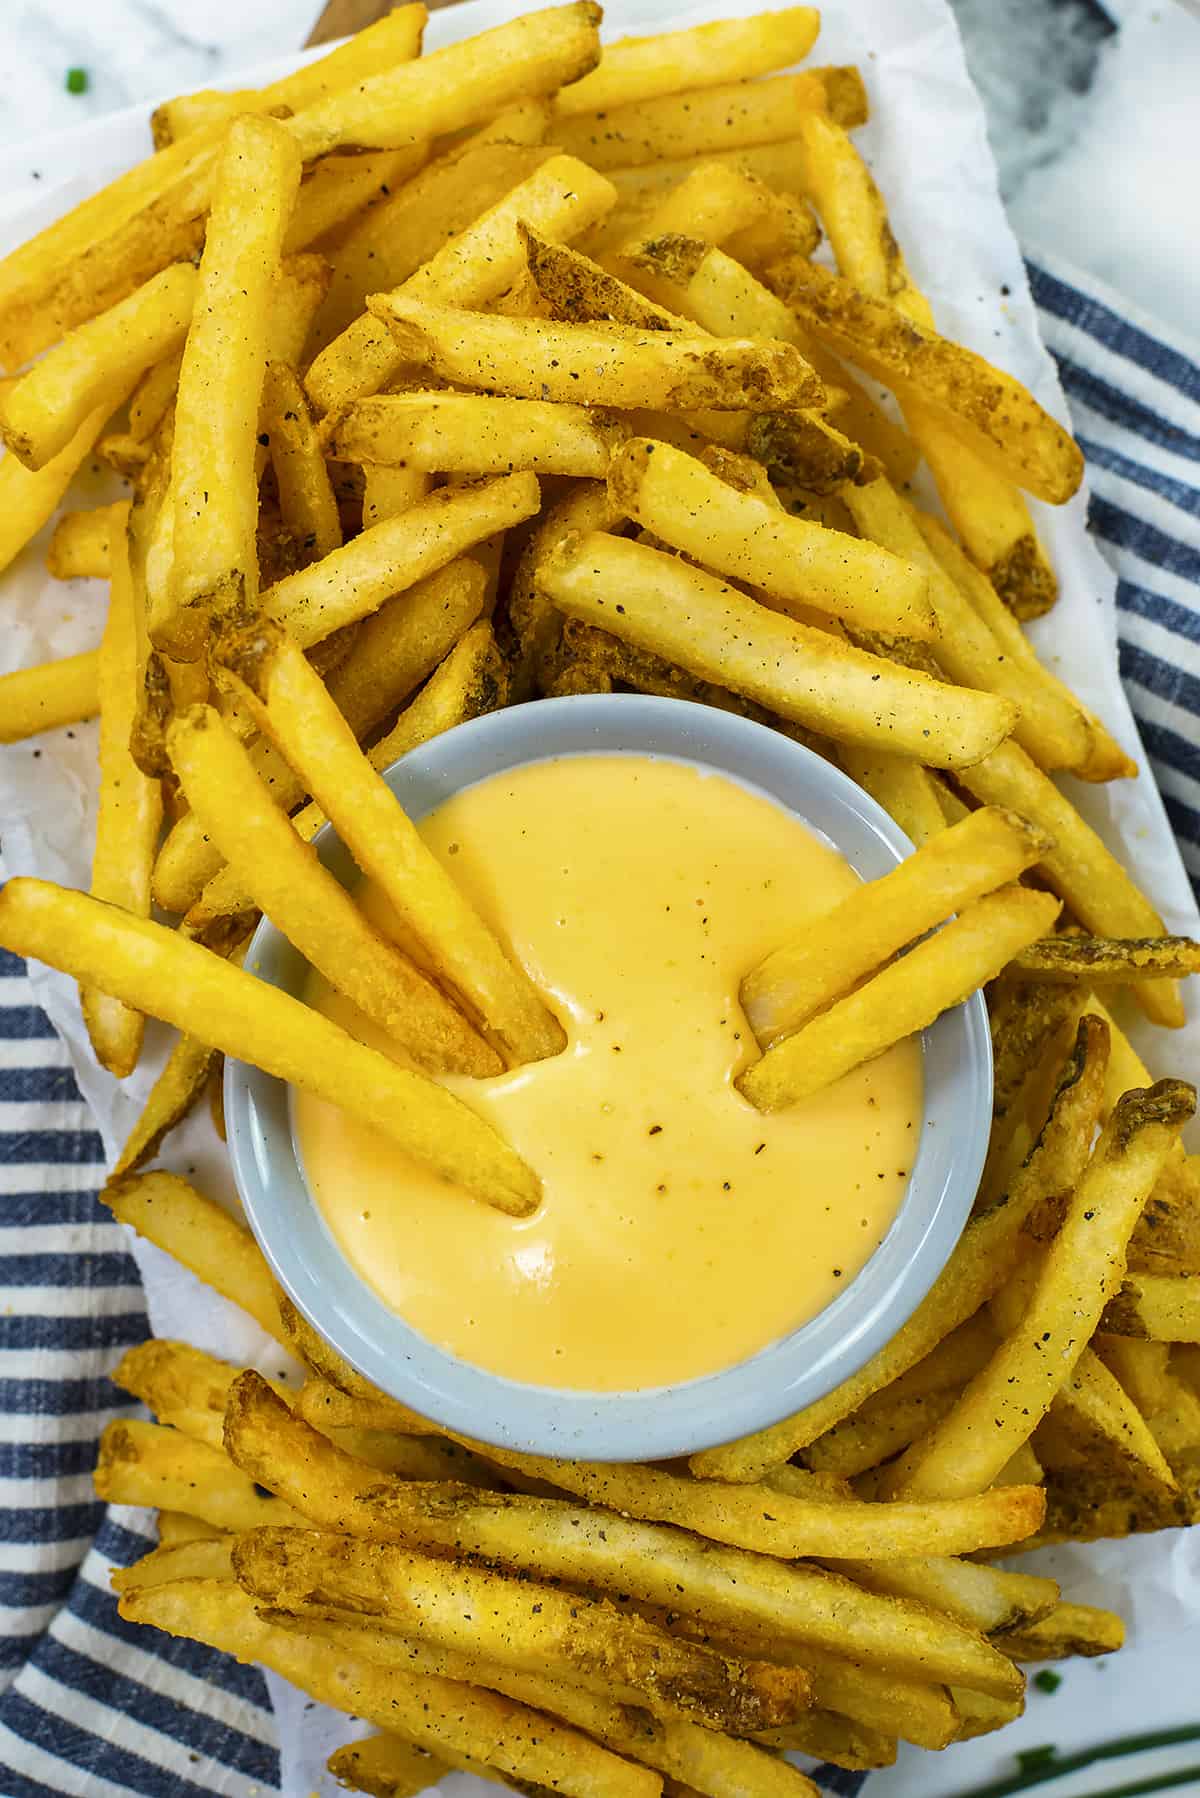 Homemade cheese sauce for fries in small dish.